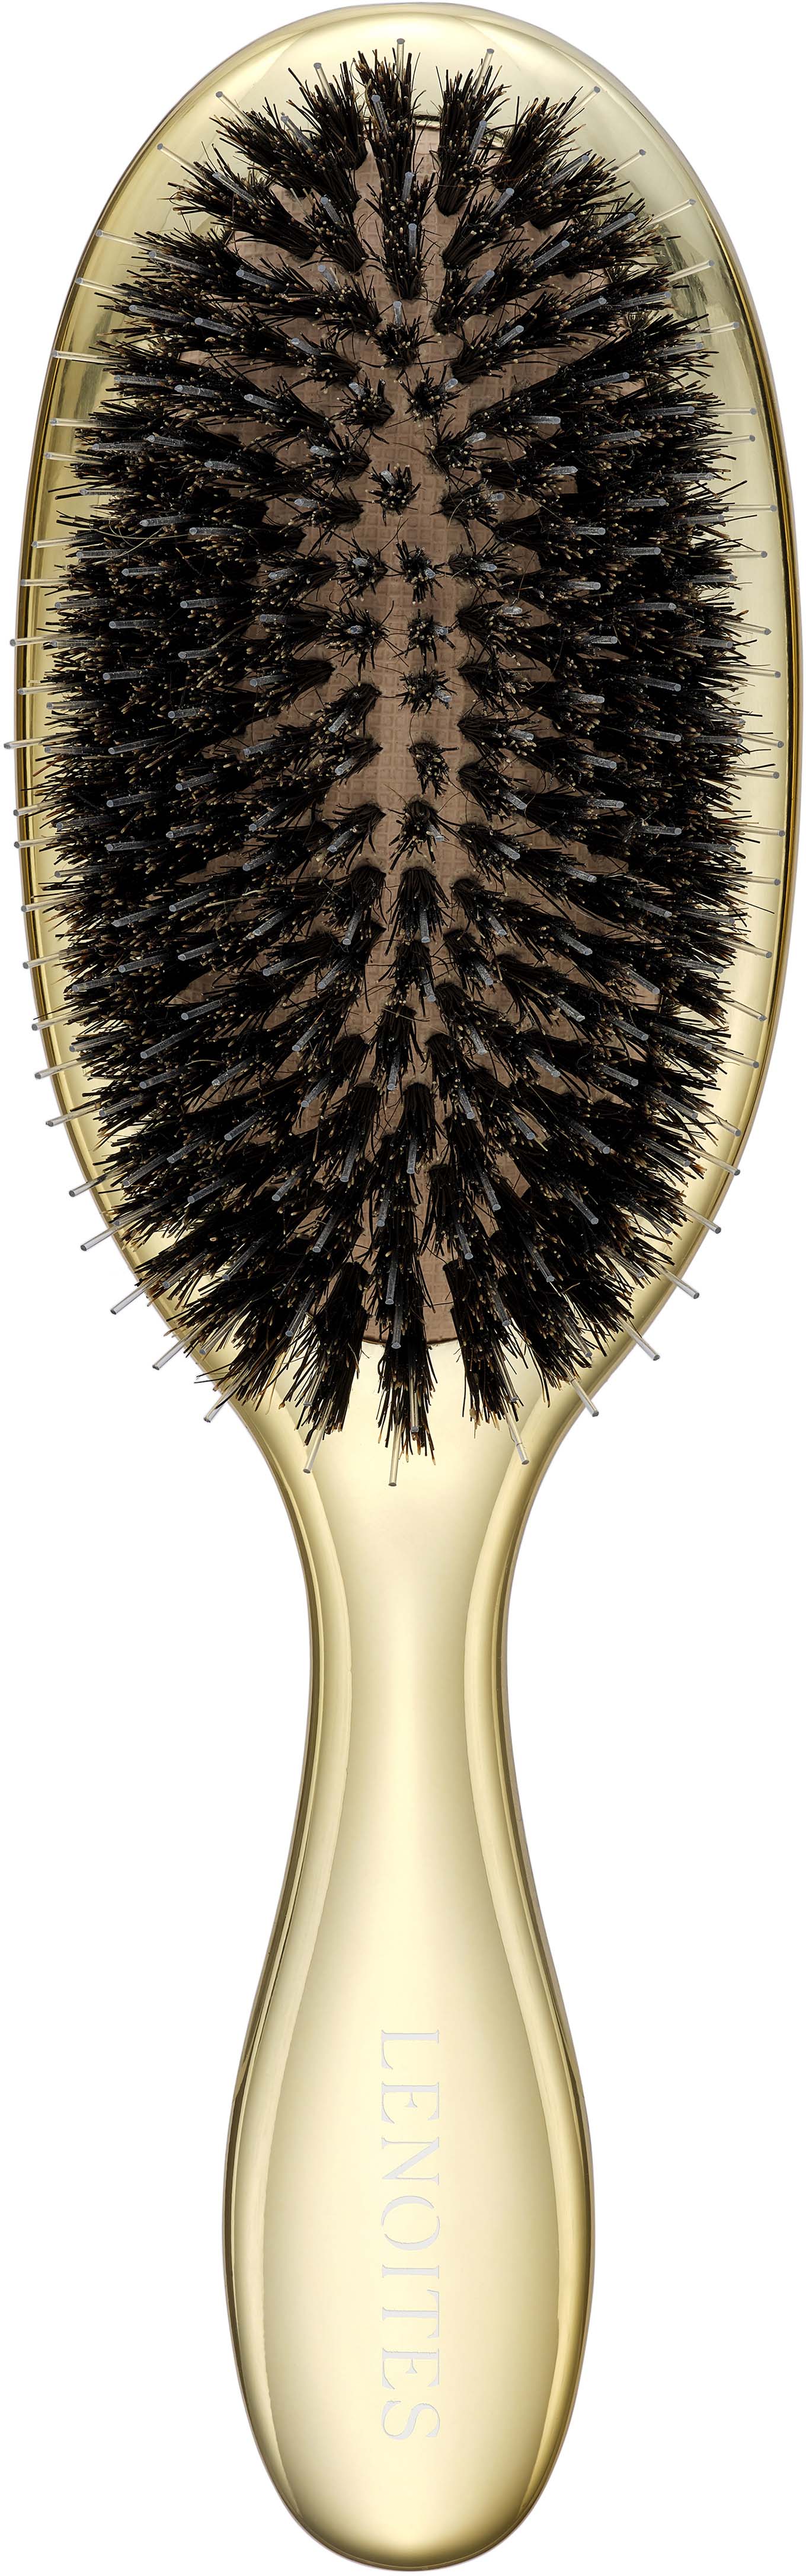 https://lyko.com/globalassets/product-images/lenoites-hair-brush-wild-boar-with-pouch-and-cleaner-tool-3171-125-0000_4.jpg?ref=AE8EDD6922